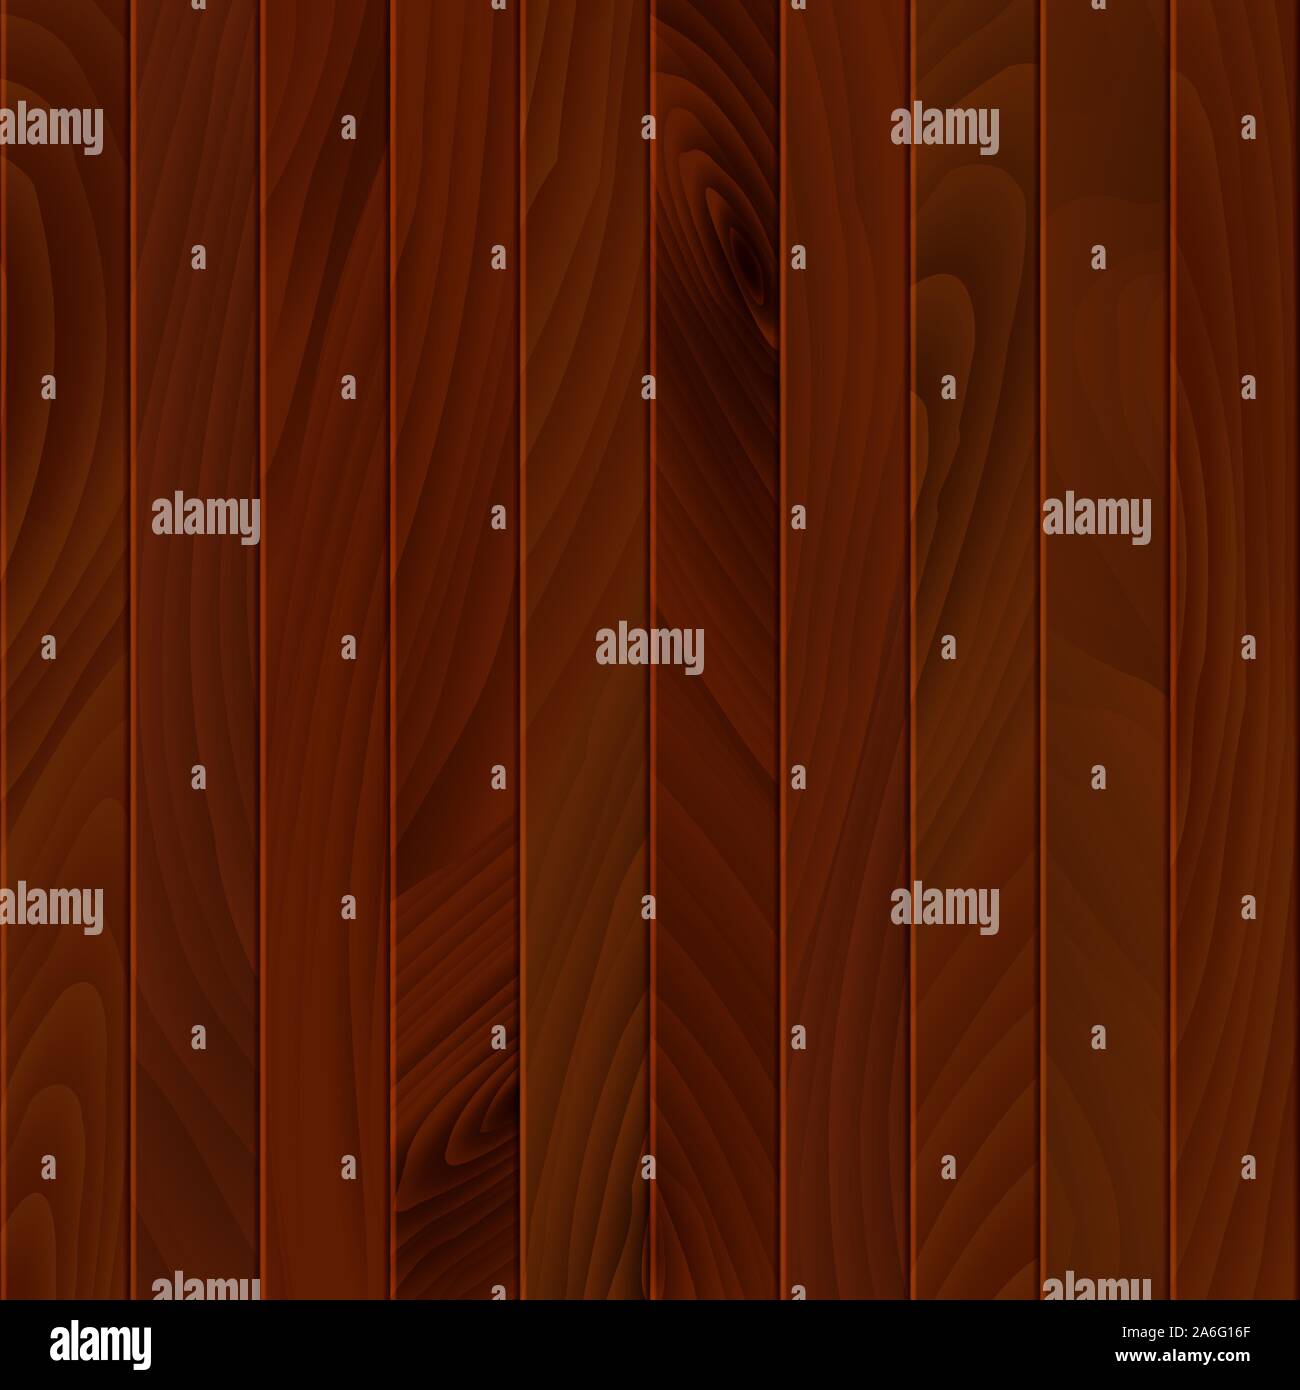 Brown wooden texture. Wood surface of floor or wall. Timber background or wallpaper. Vector illustration Stock Vector